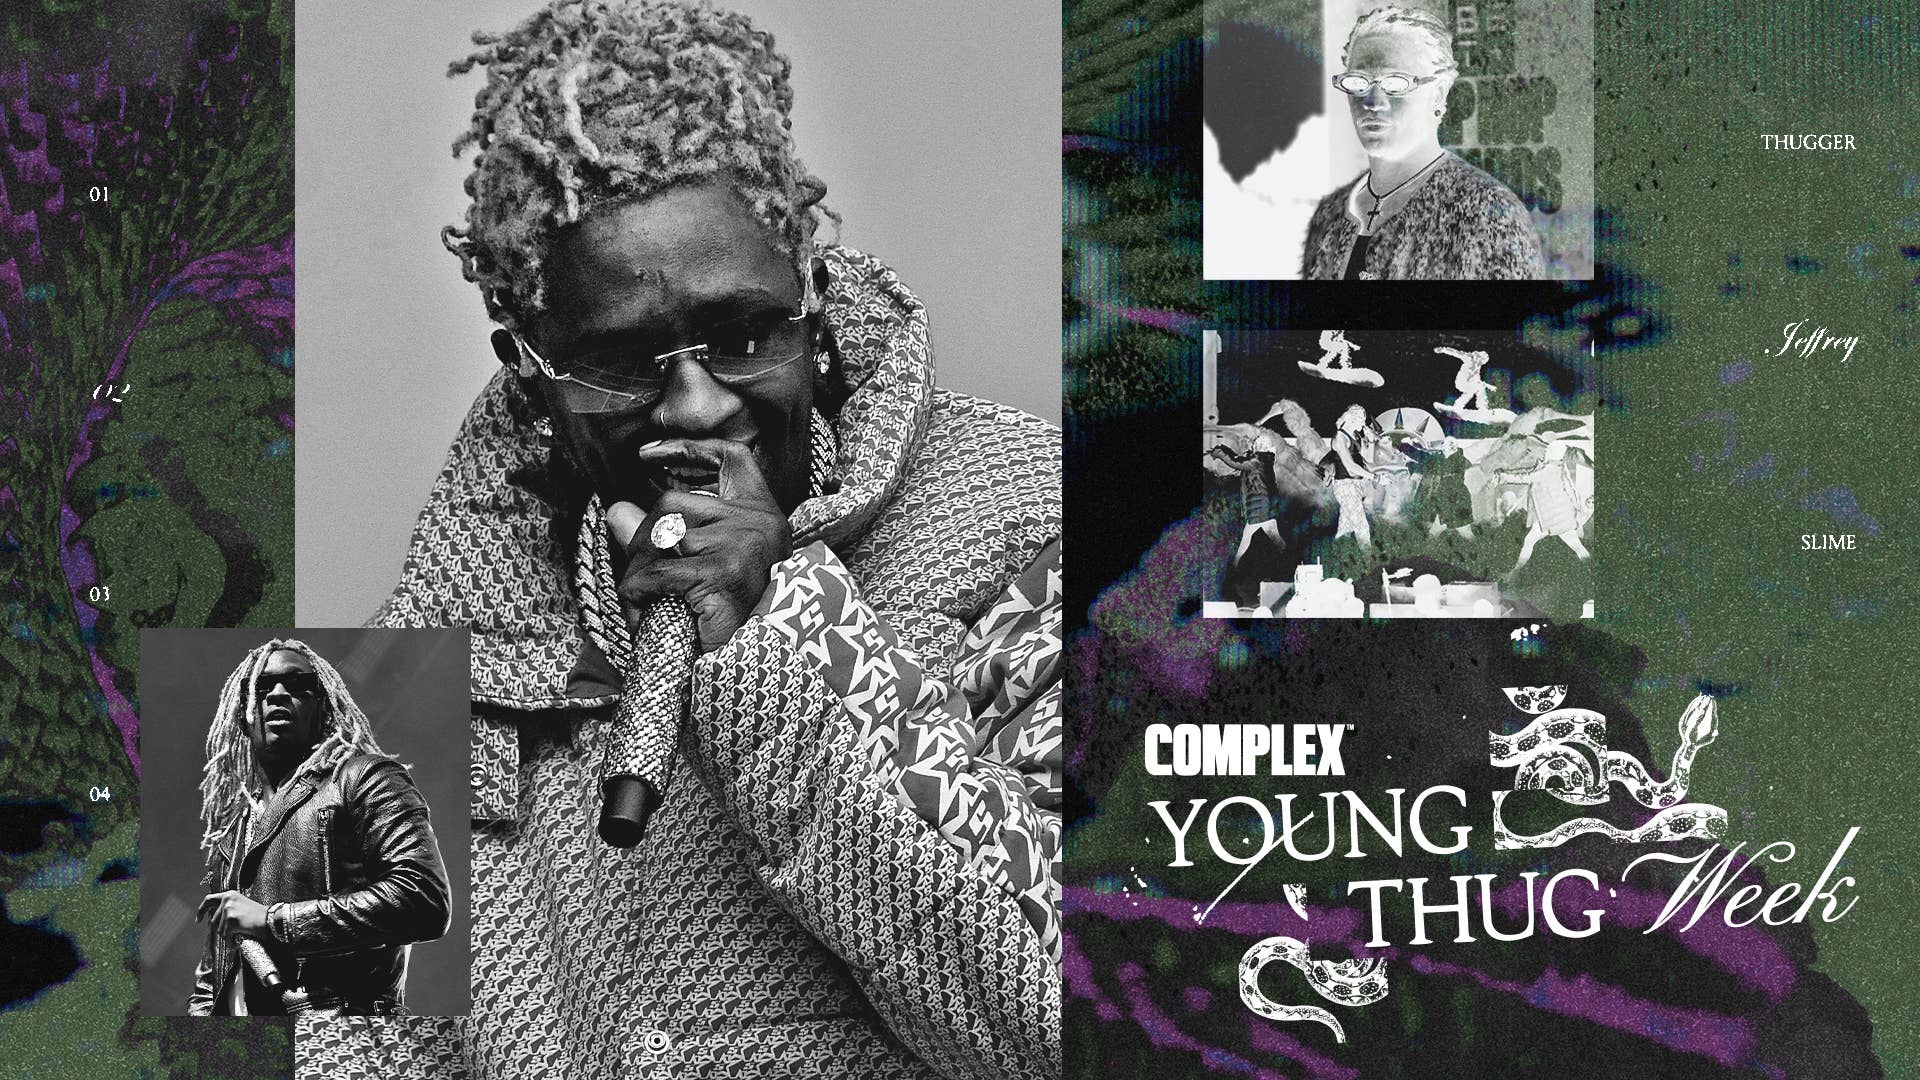 Why Young Thug Is an Icon / Young Thug Week at Complex